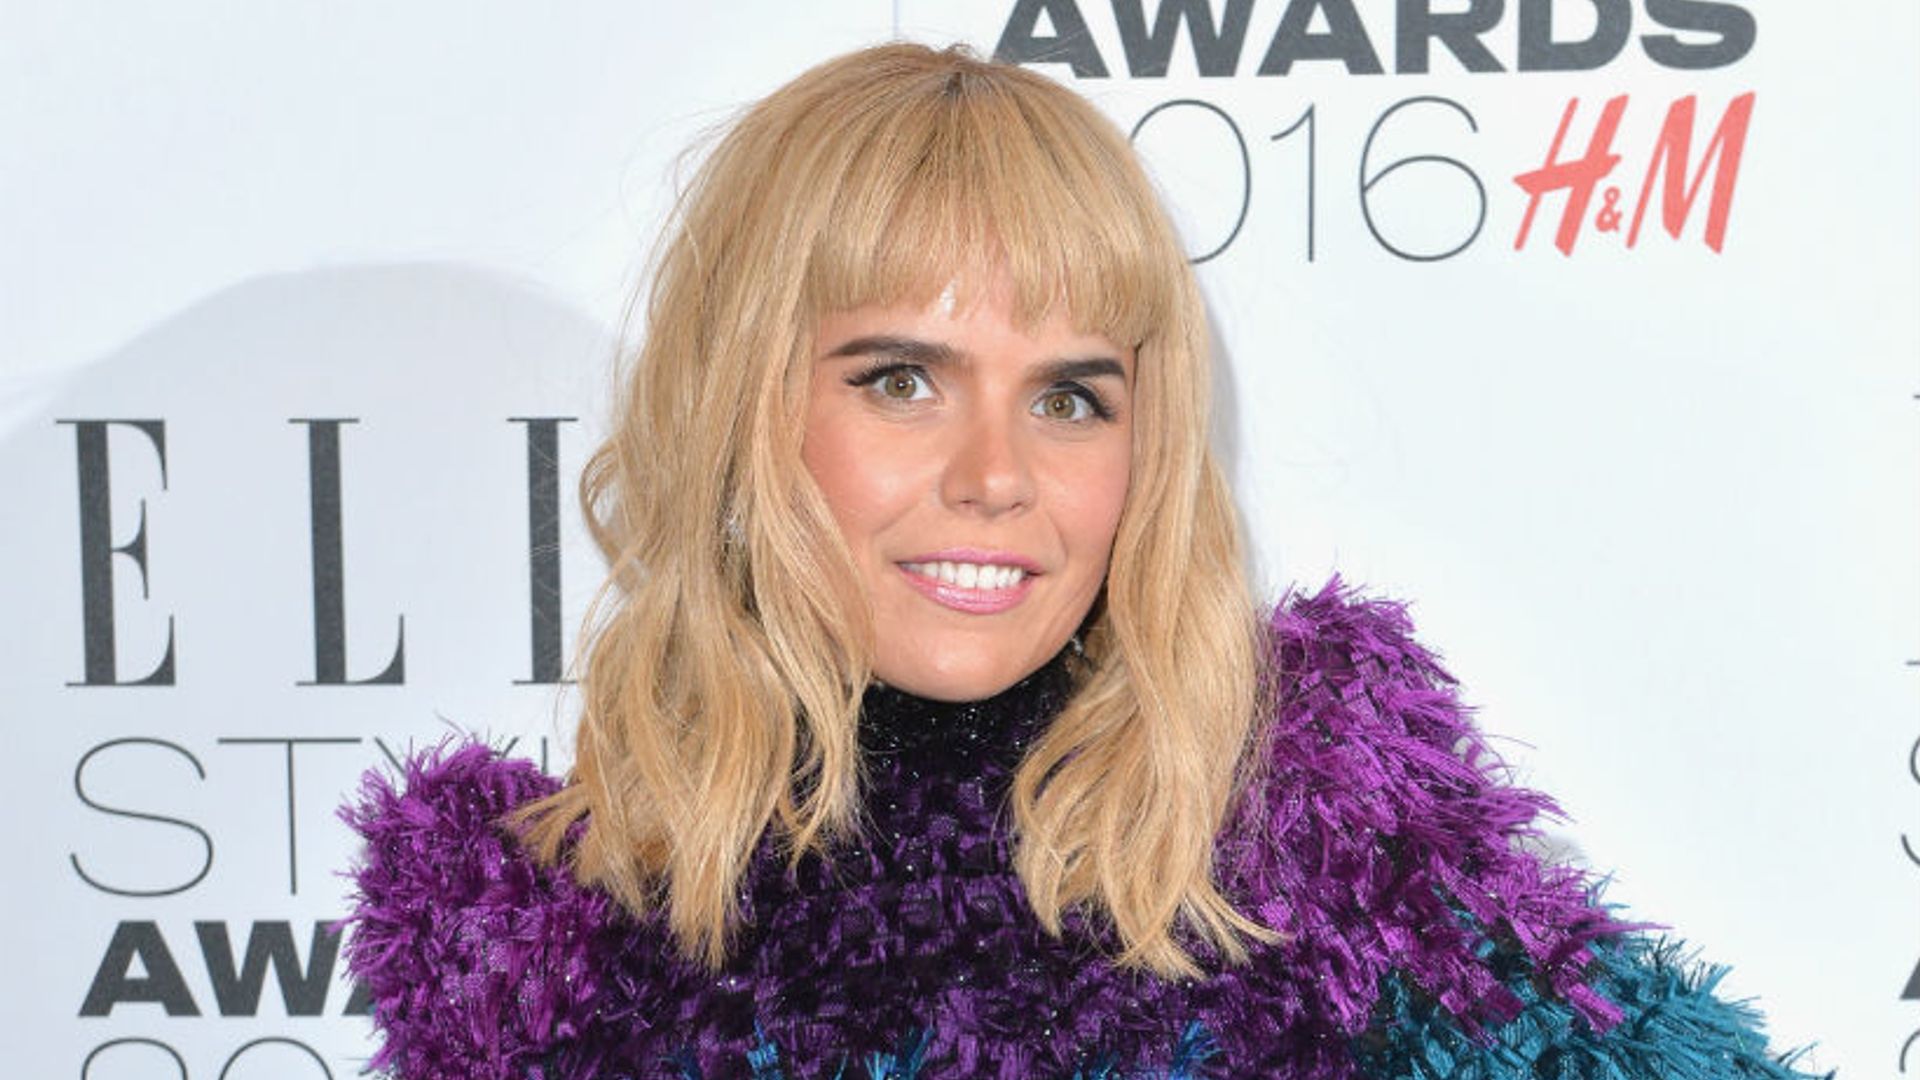 Paloma Faith on why she won't reveal her child's gender